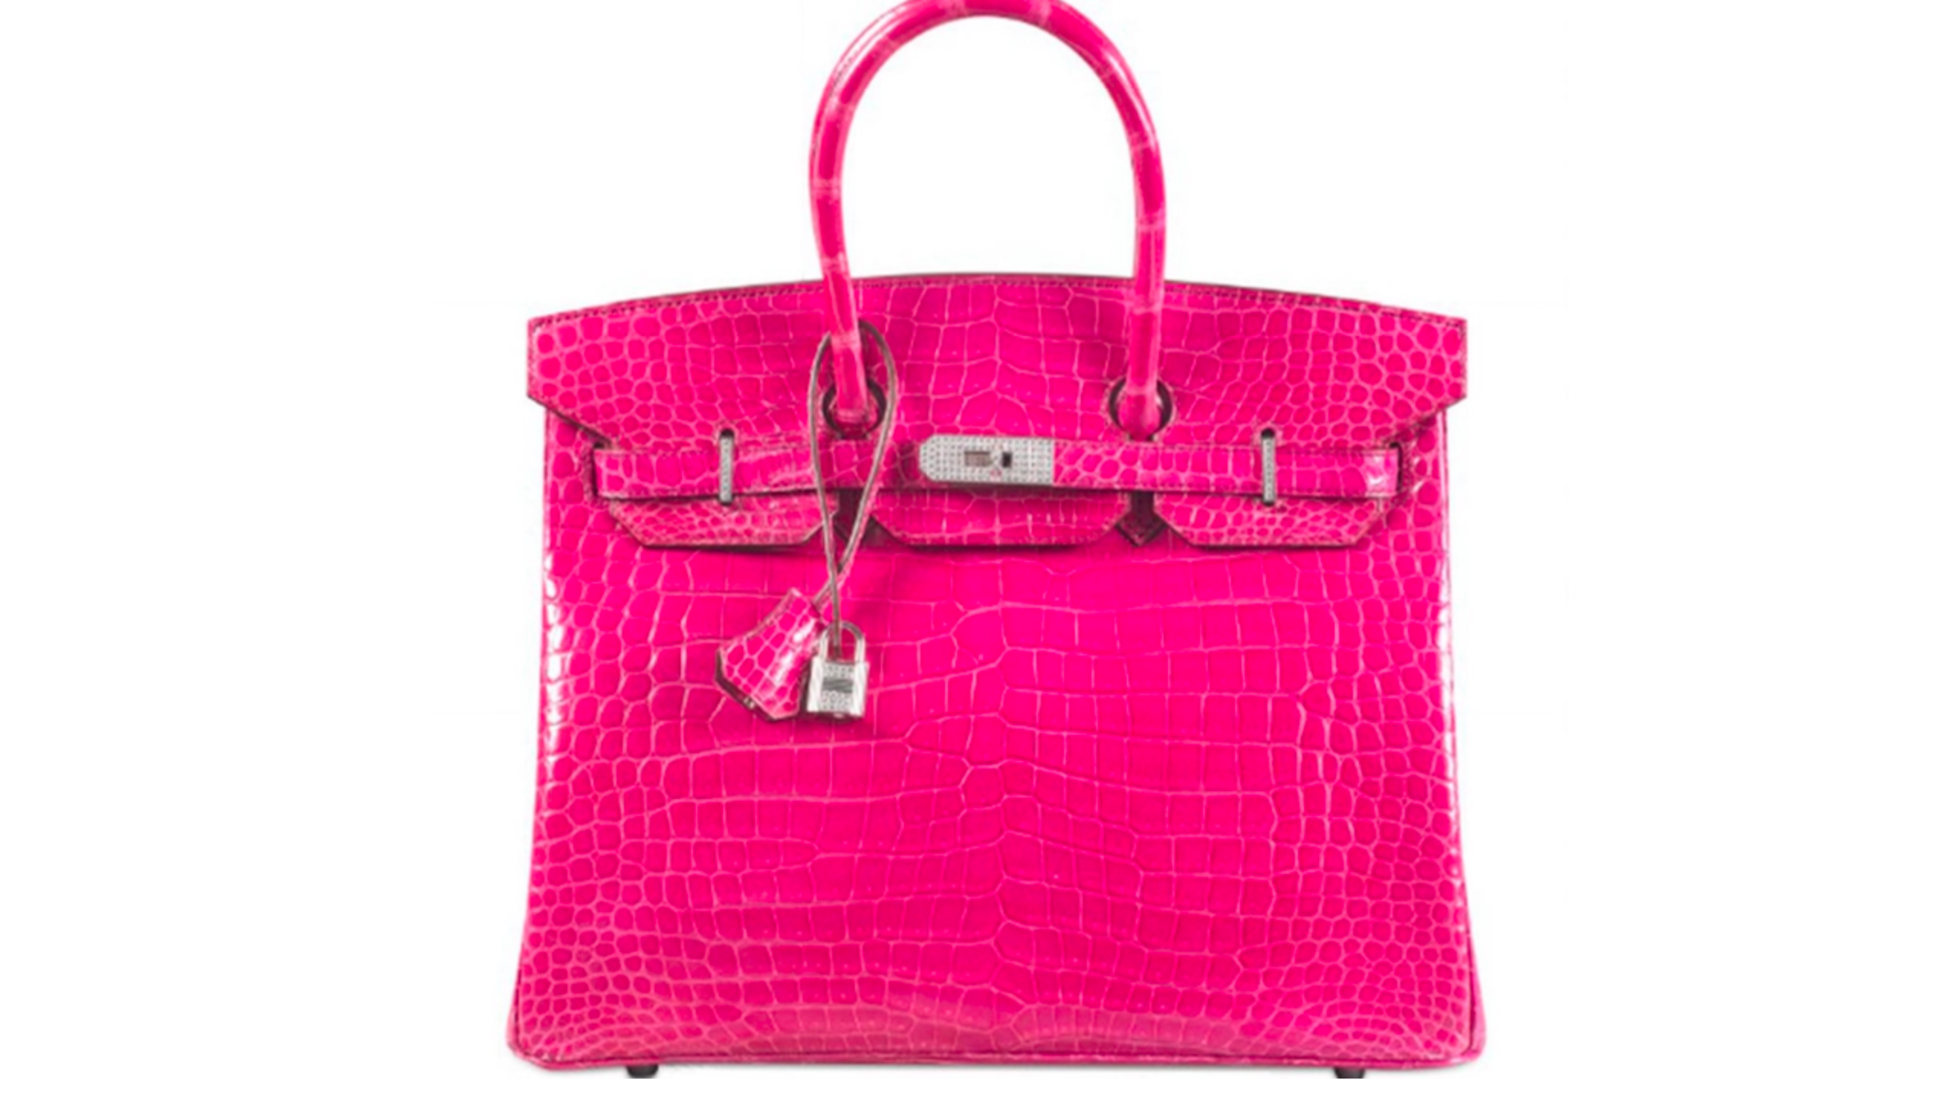 The Birkin Bag: Five things you need to know - Businessday NG